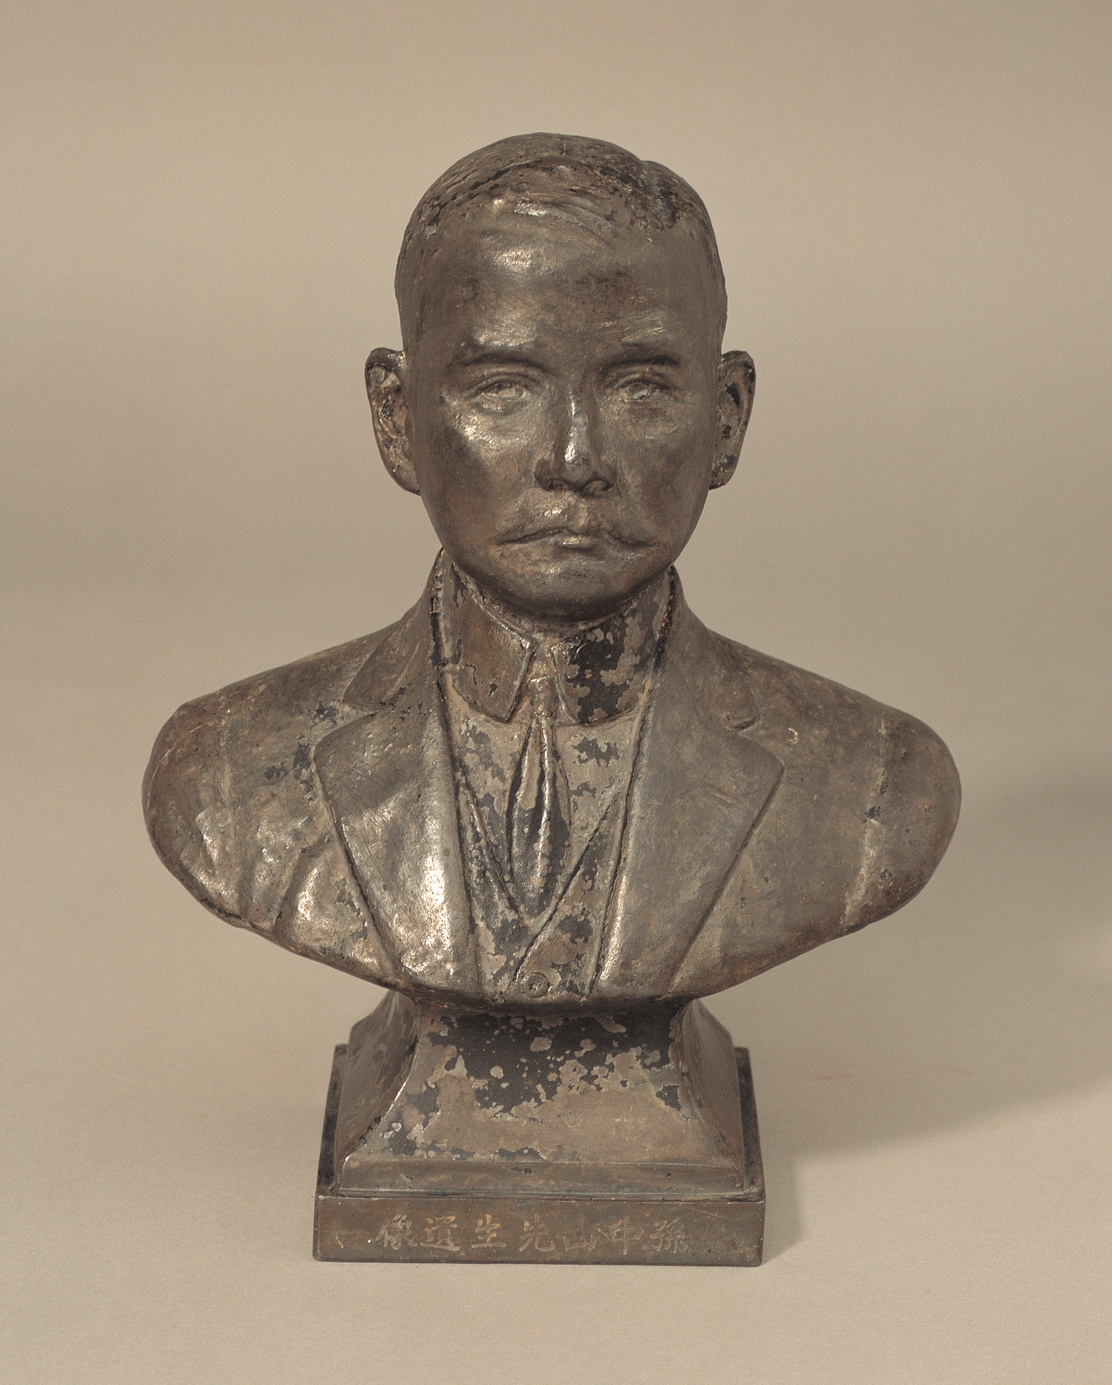 Bronze bust of Dr Sun Yat-sen commissioned by his Japanese friend Umeya Shoukichi, 1929. Donated by Mr Lau Chi Yuen